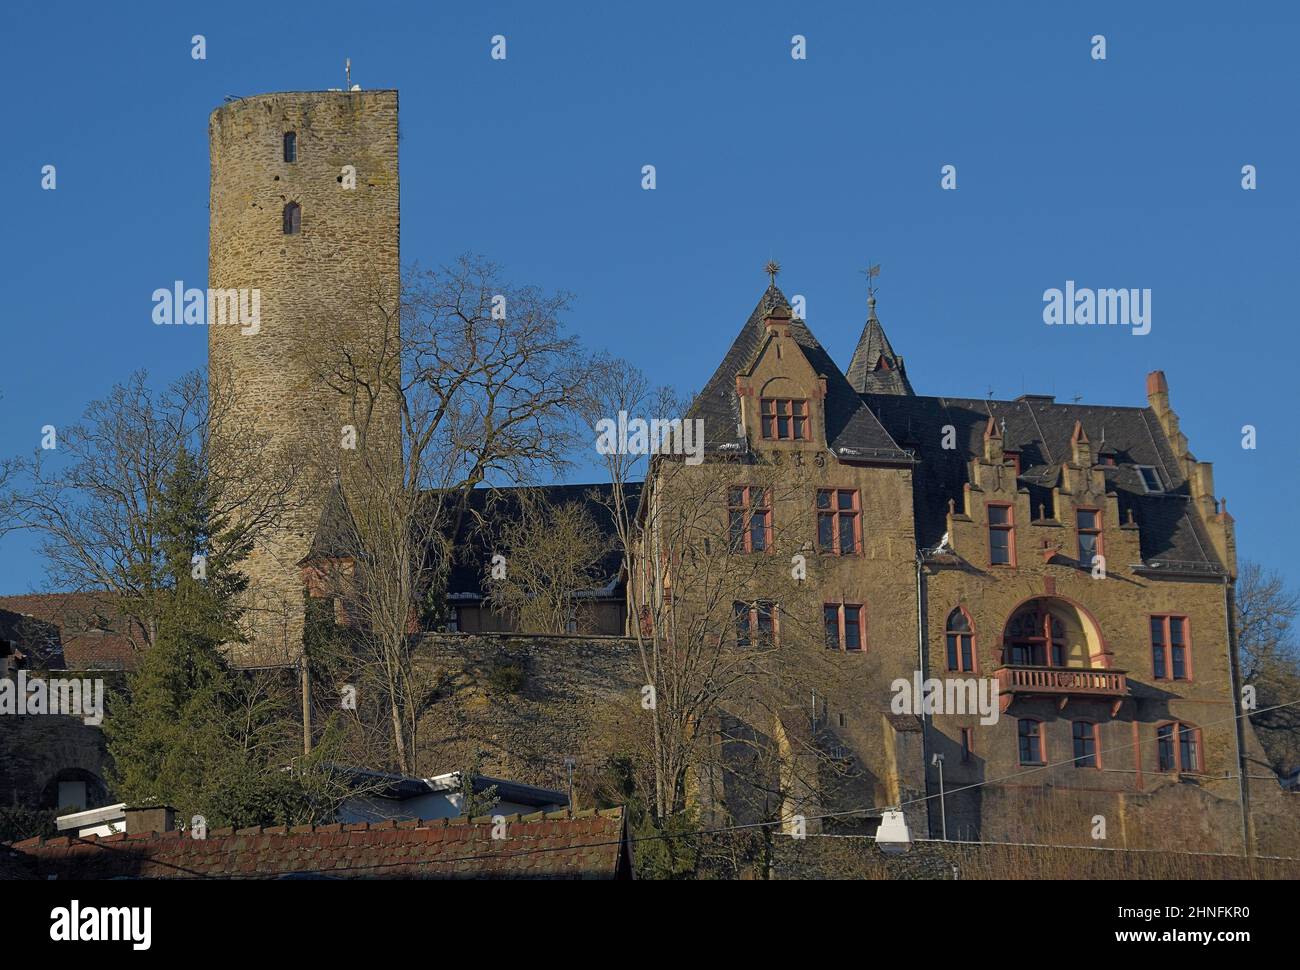 Castle, Usingen, Kransberg, Hesse, Germany, in the Third Reich part of the Fuehrer's headquarters Adlerhorst, Hesse, Germany Stock Photo